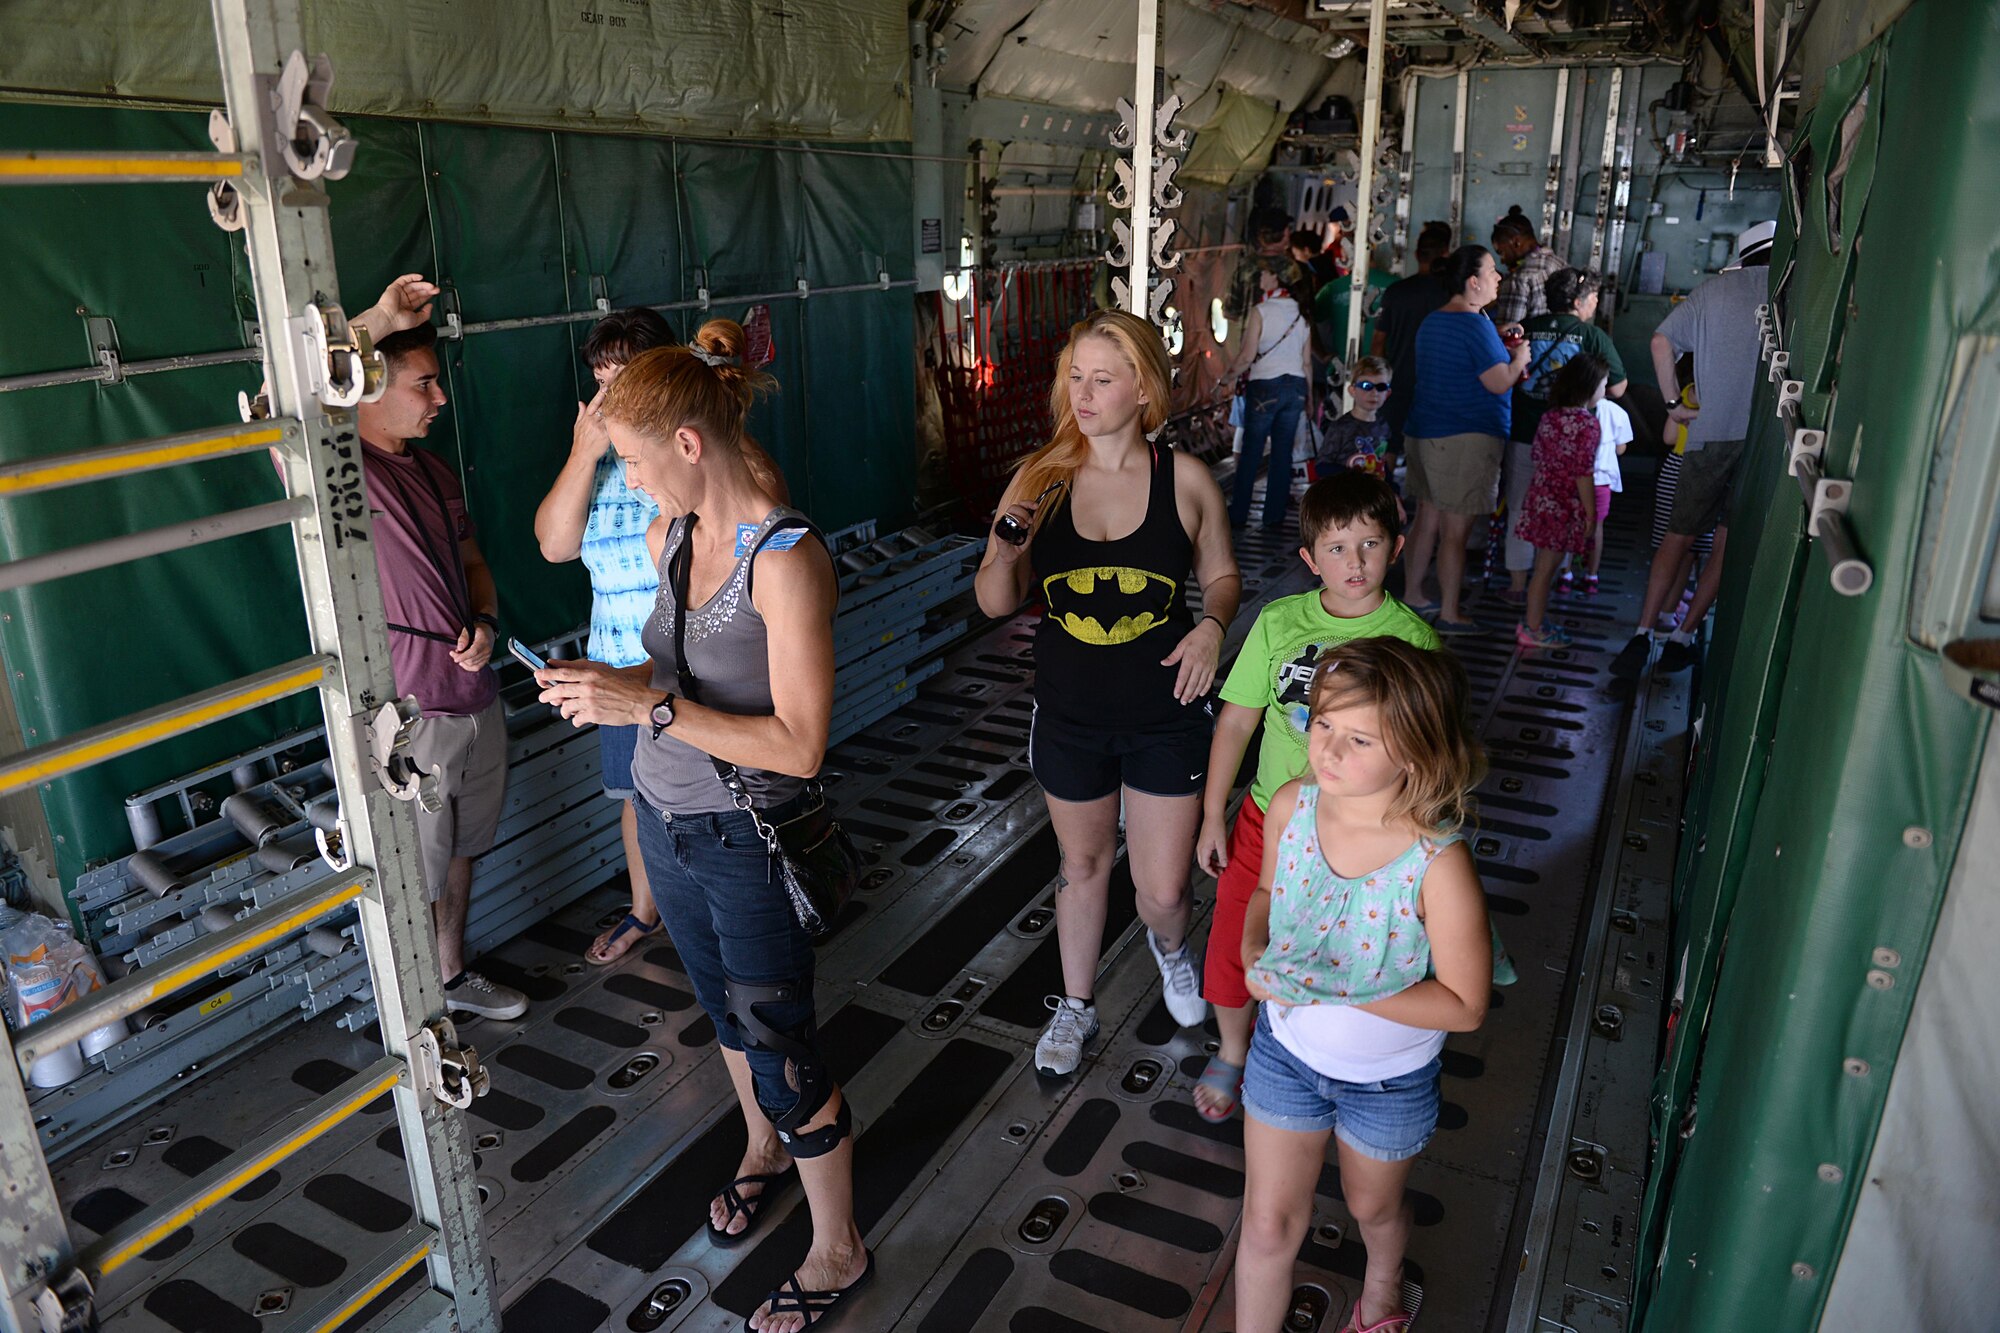 People from Wichita Falls and neighboring communities tour the different aircraft during the 75th Anniversary Air Show Celebration at Sheppard Air Force Base, Texas, Sept. 18, 2016. The celebration had numerous performers such as the Tora Tora Tora Pearl Harbor reenactment, the Air Force Wings of Blue, skydiver Dana Bowman, Viper Air Show jet car and solo demo, Randy Ball’s Mig 17 and Vietnam T-37 demo, Kent Pietsch Jelly Belly comedy air act, Texas Raiders B-17 WWII demo, Freedom Flyers P-51 WWII demo, and the world-famous U.S. Air Force Thunderbirds. (U.S. Air Force photo by Senior Airman Kyle E. Gese)